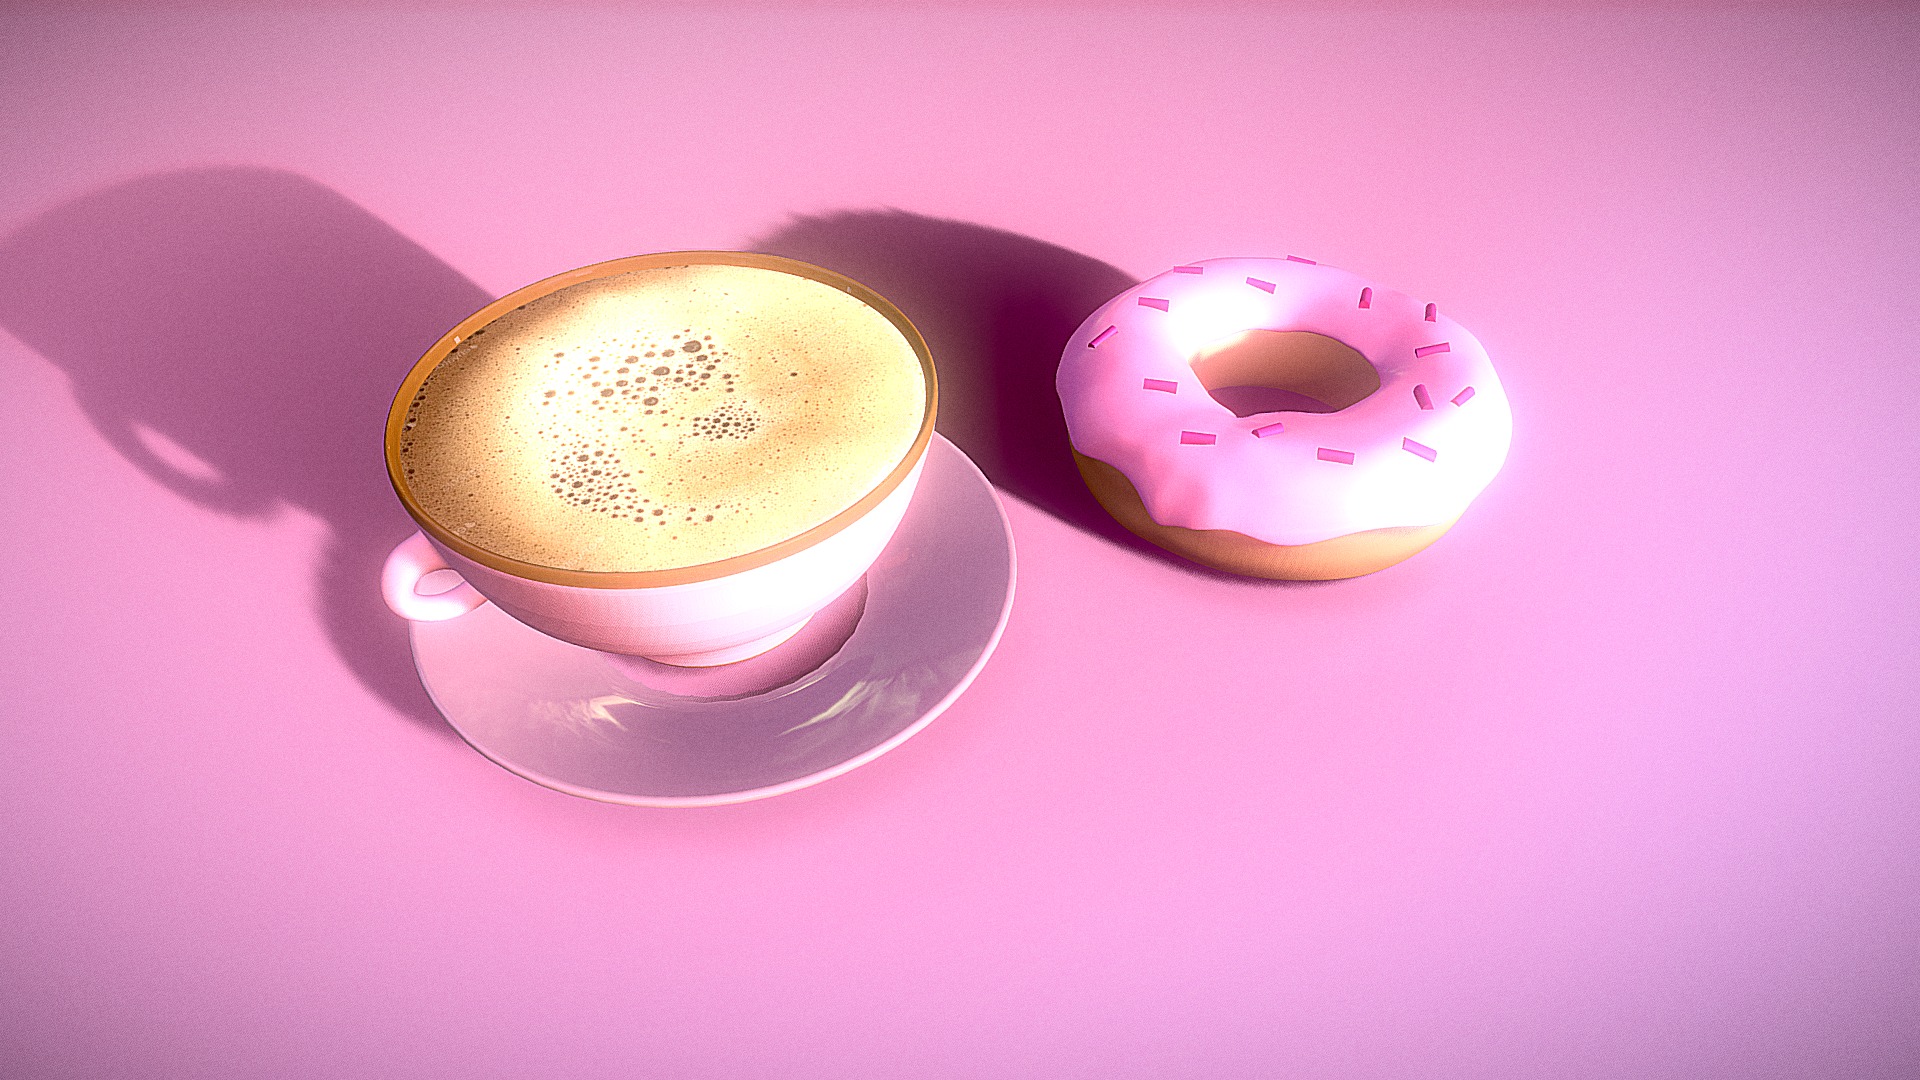 3D model My Sweet - This is a 3D model of the My Sweet. The 3D model is about a cup of coffee next to a donut.